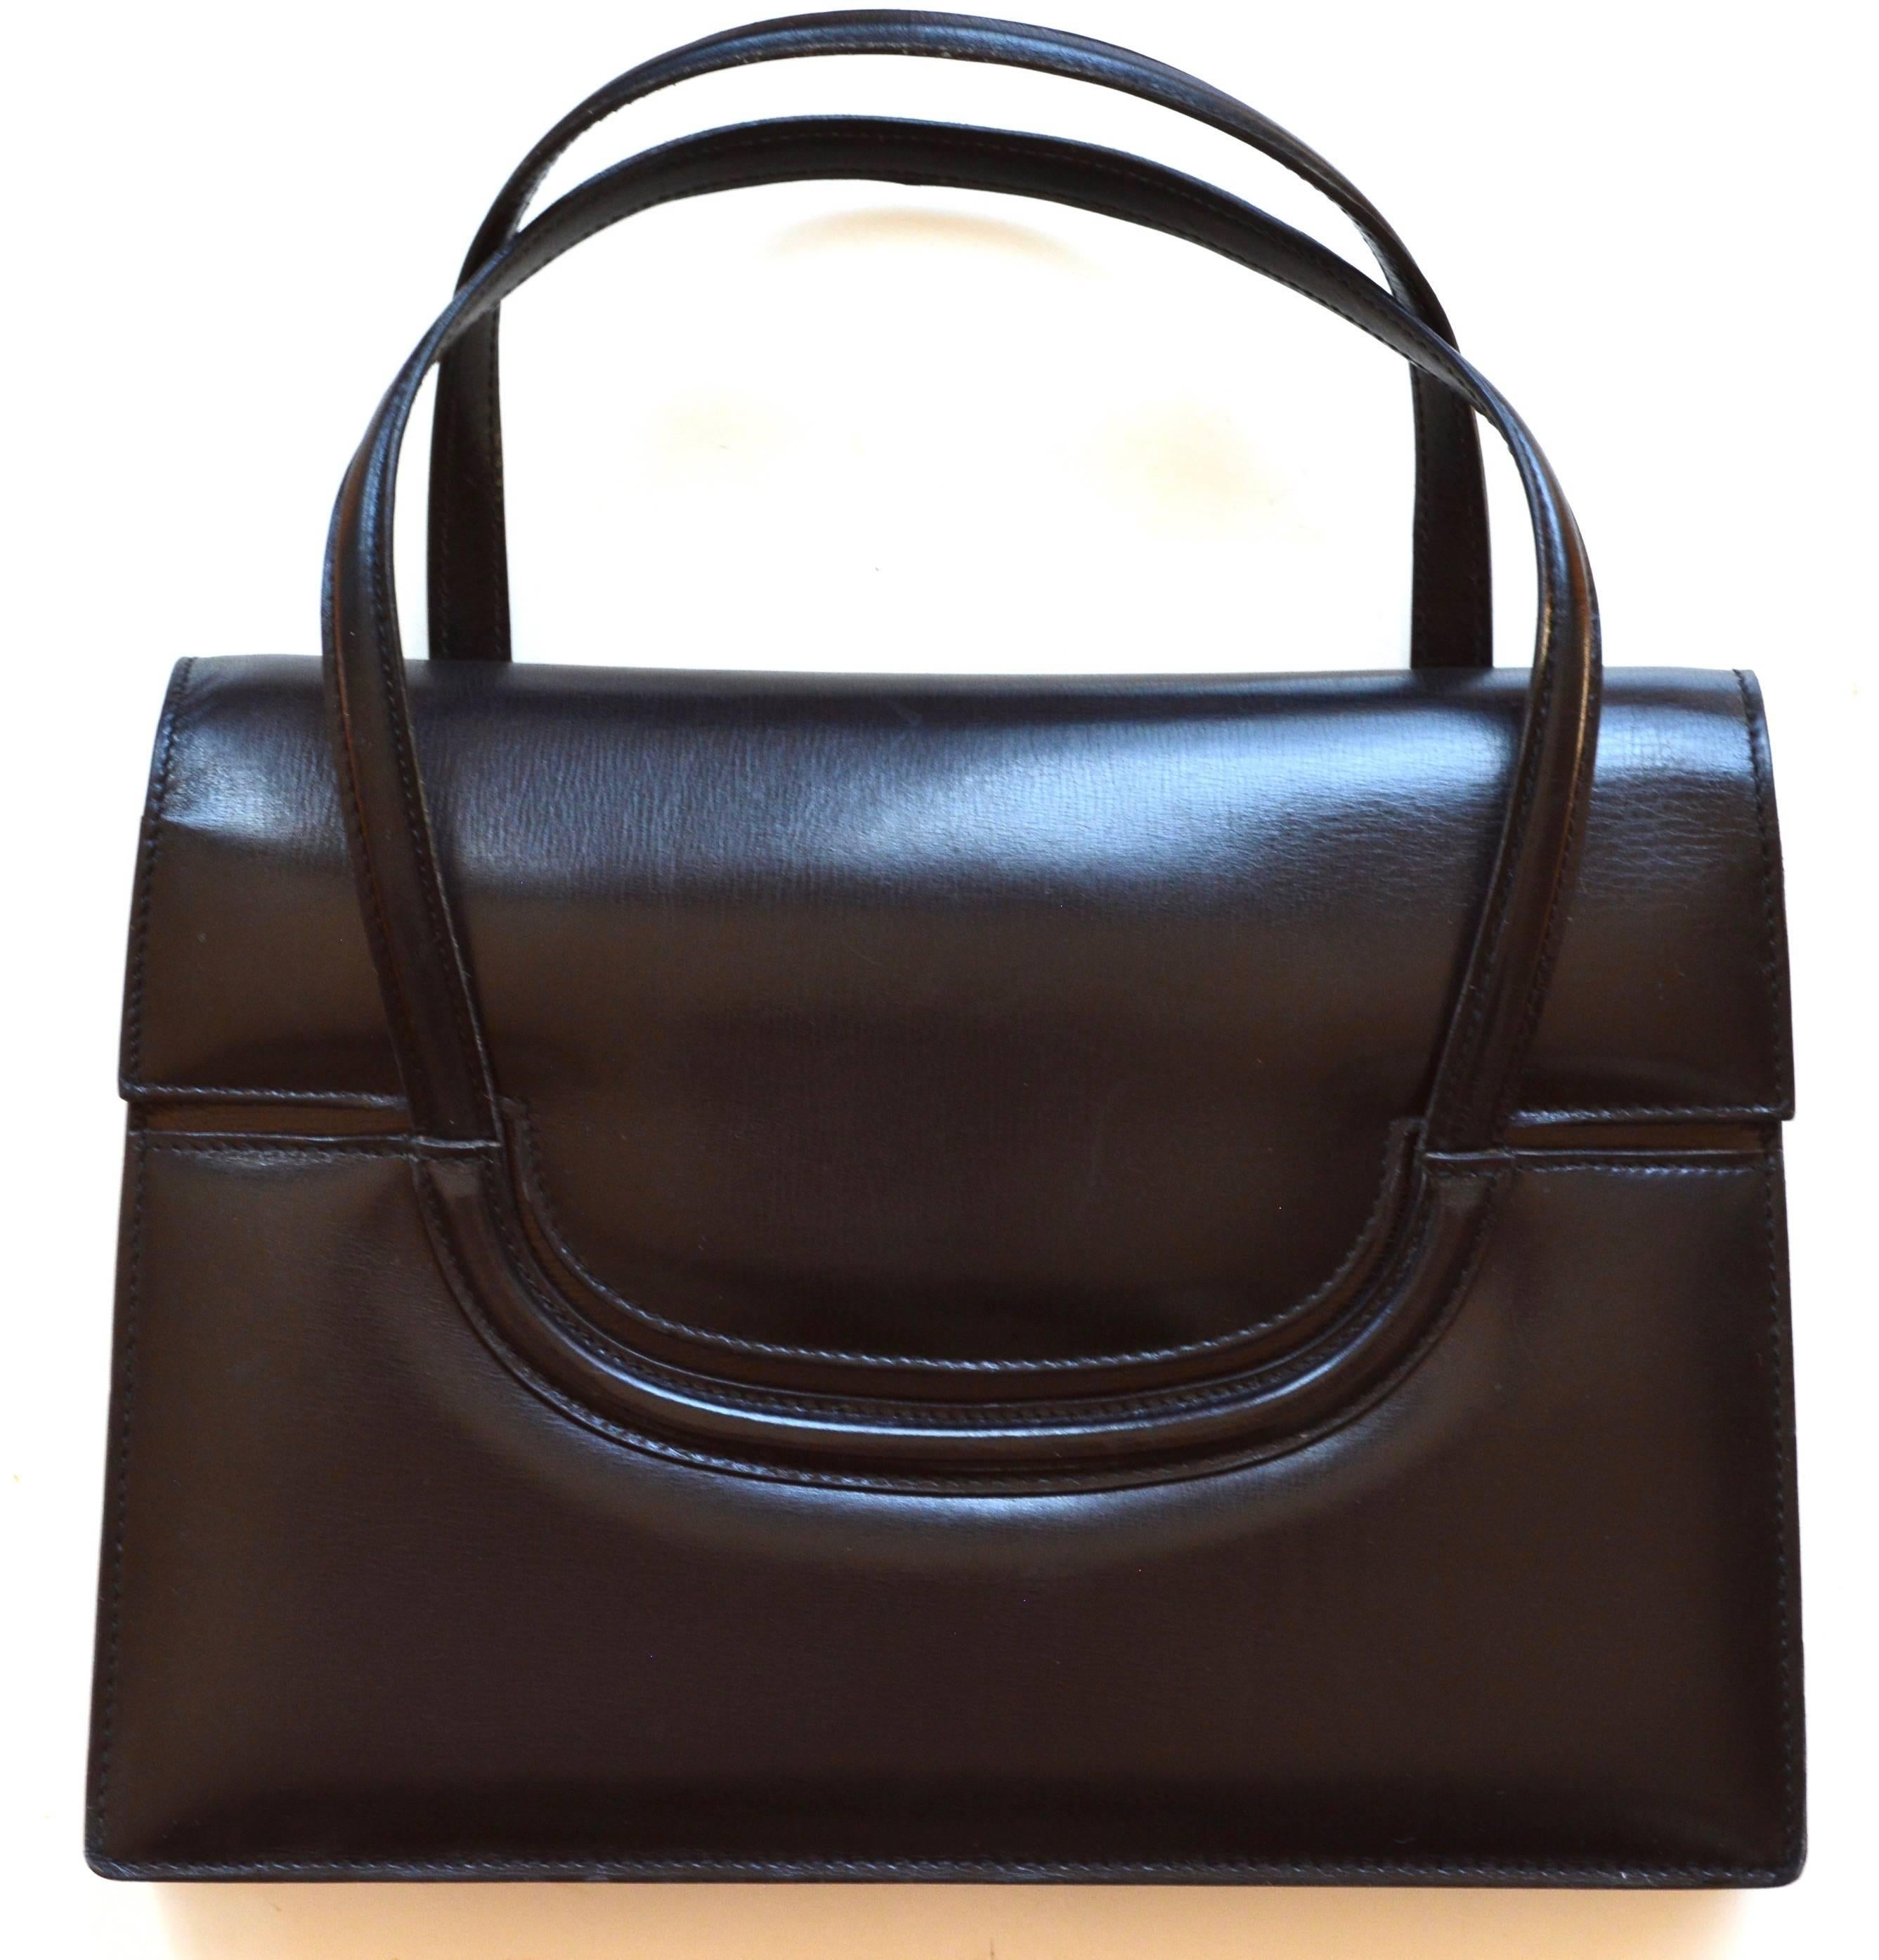 1960s Gucci Black Leather Bag In Excellent Condition For Sale In Litchfield County, CT